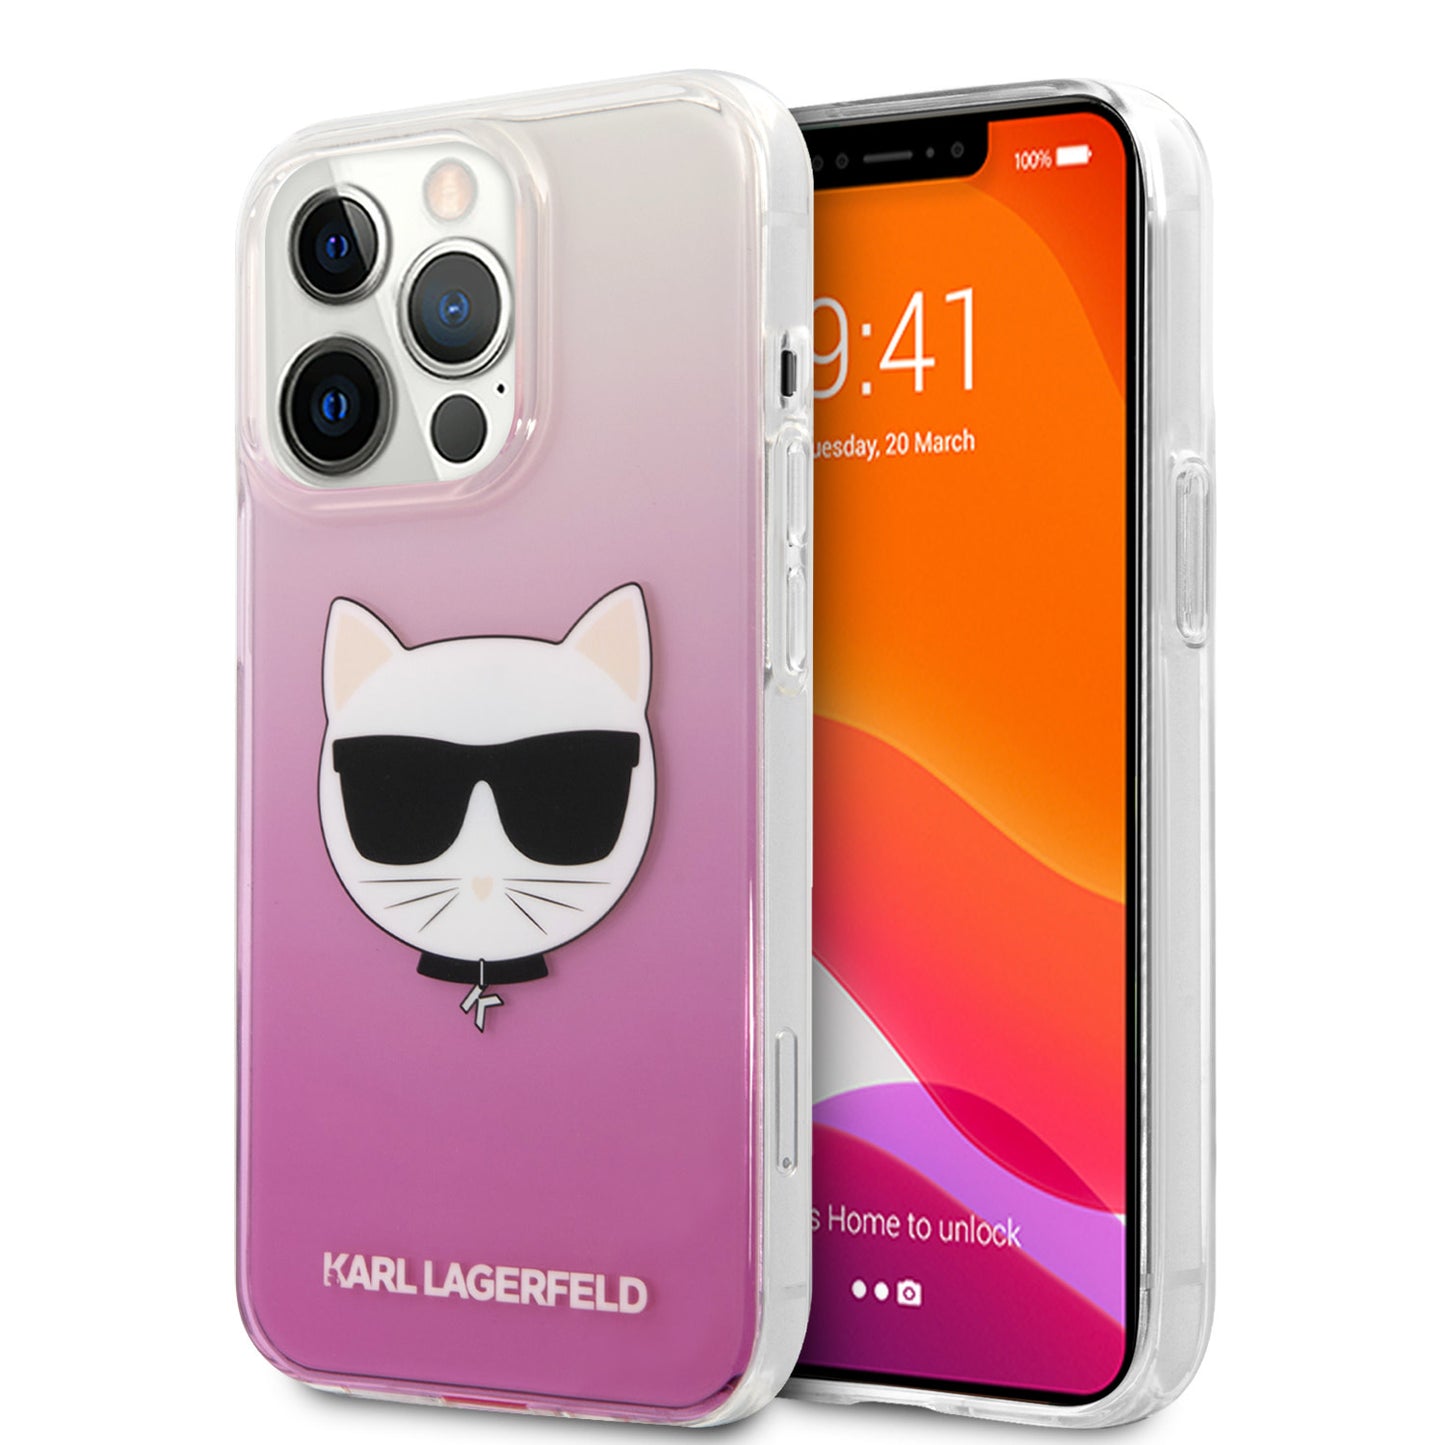 Karl Lagerfeld iPhone 13 PRO Backcover - Choupette - Transparant Roze